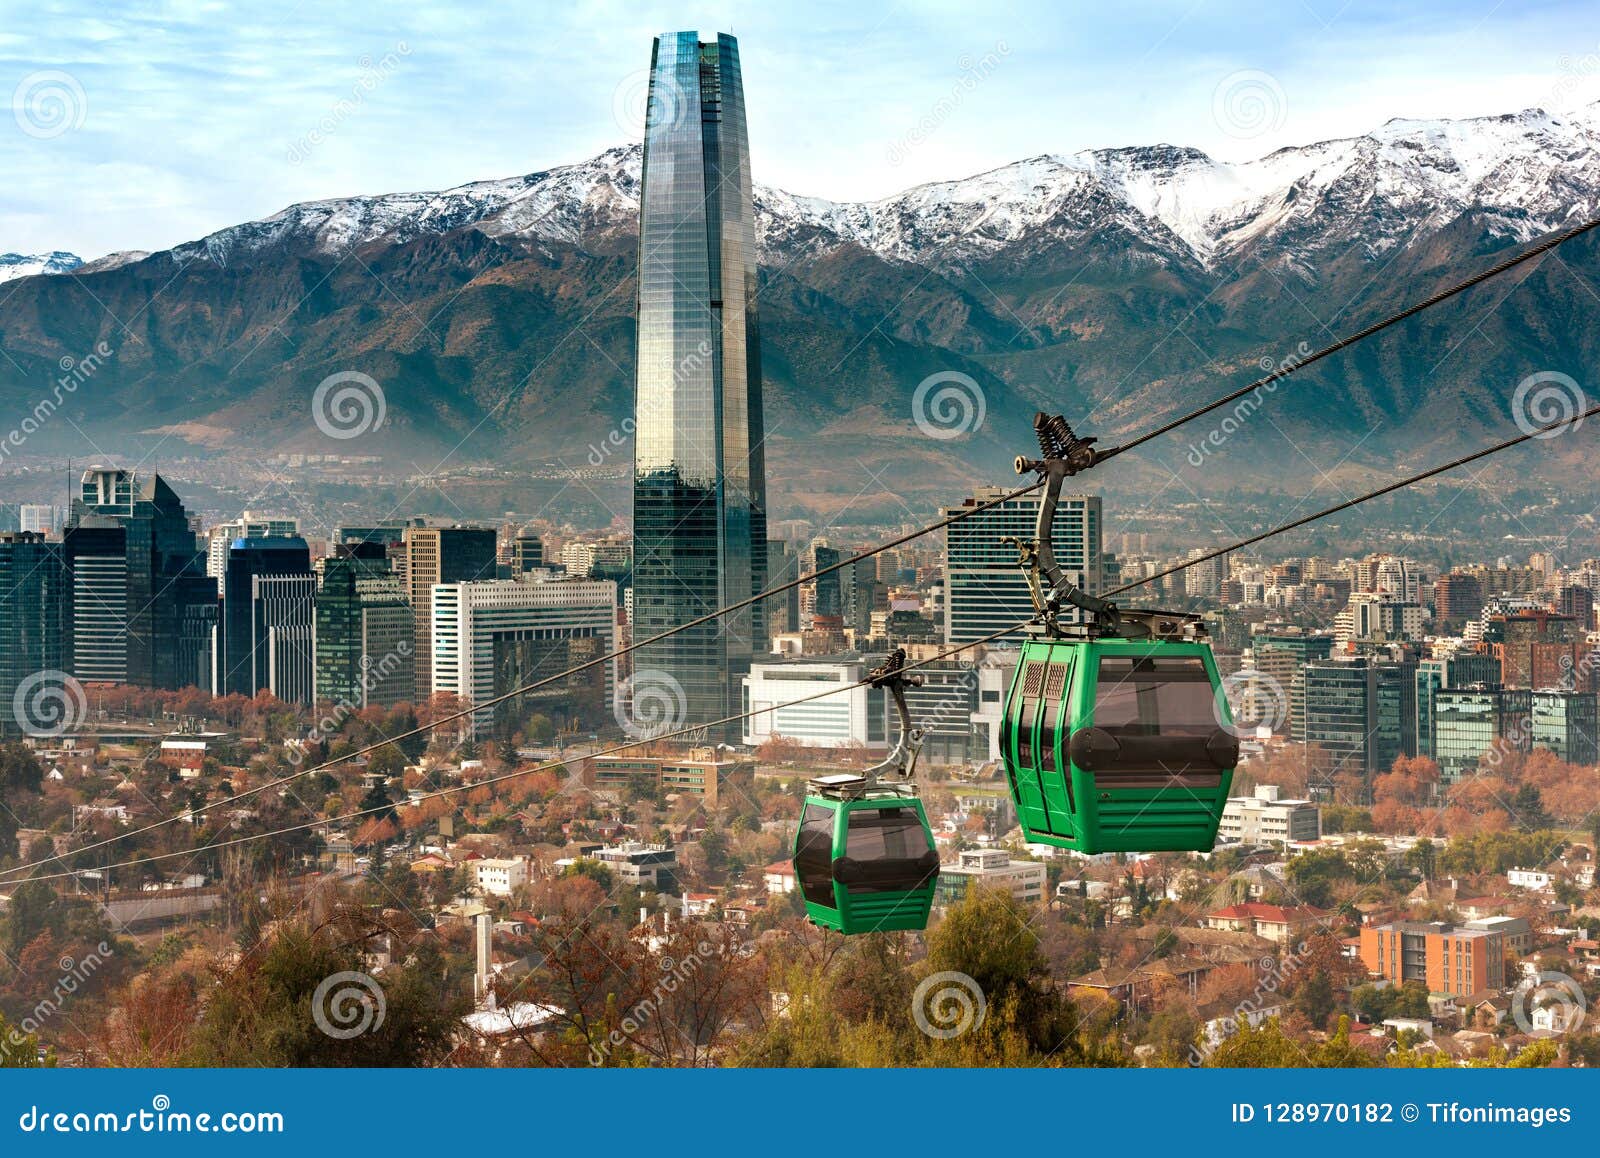 cable car in san cristobal hill, overlooking a panoramic view of santiago